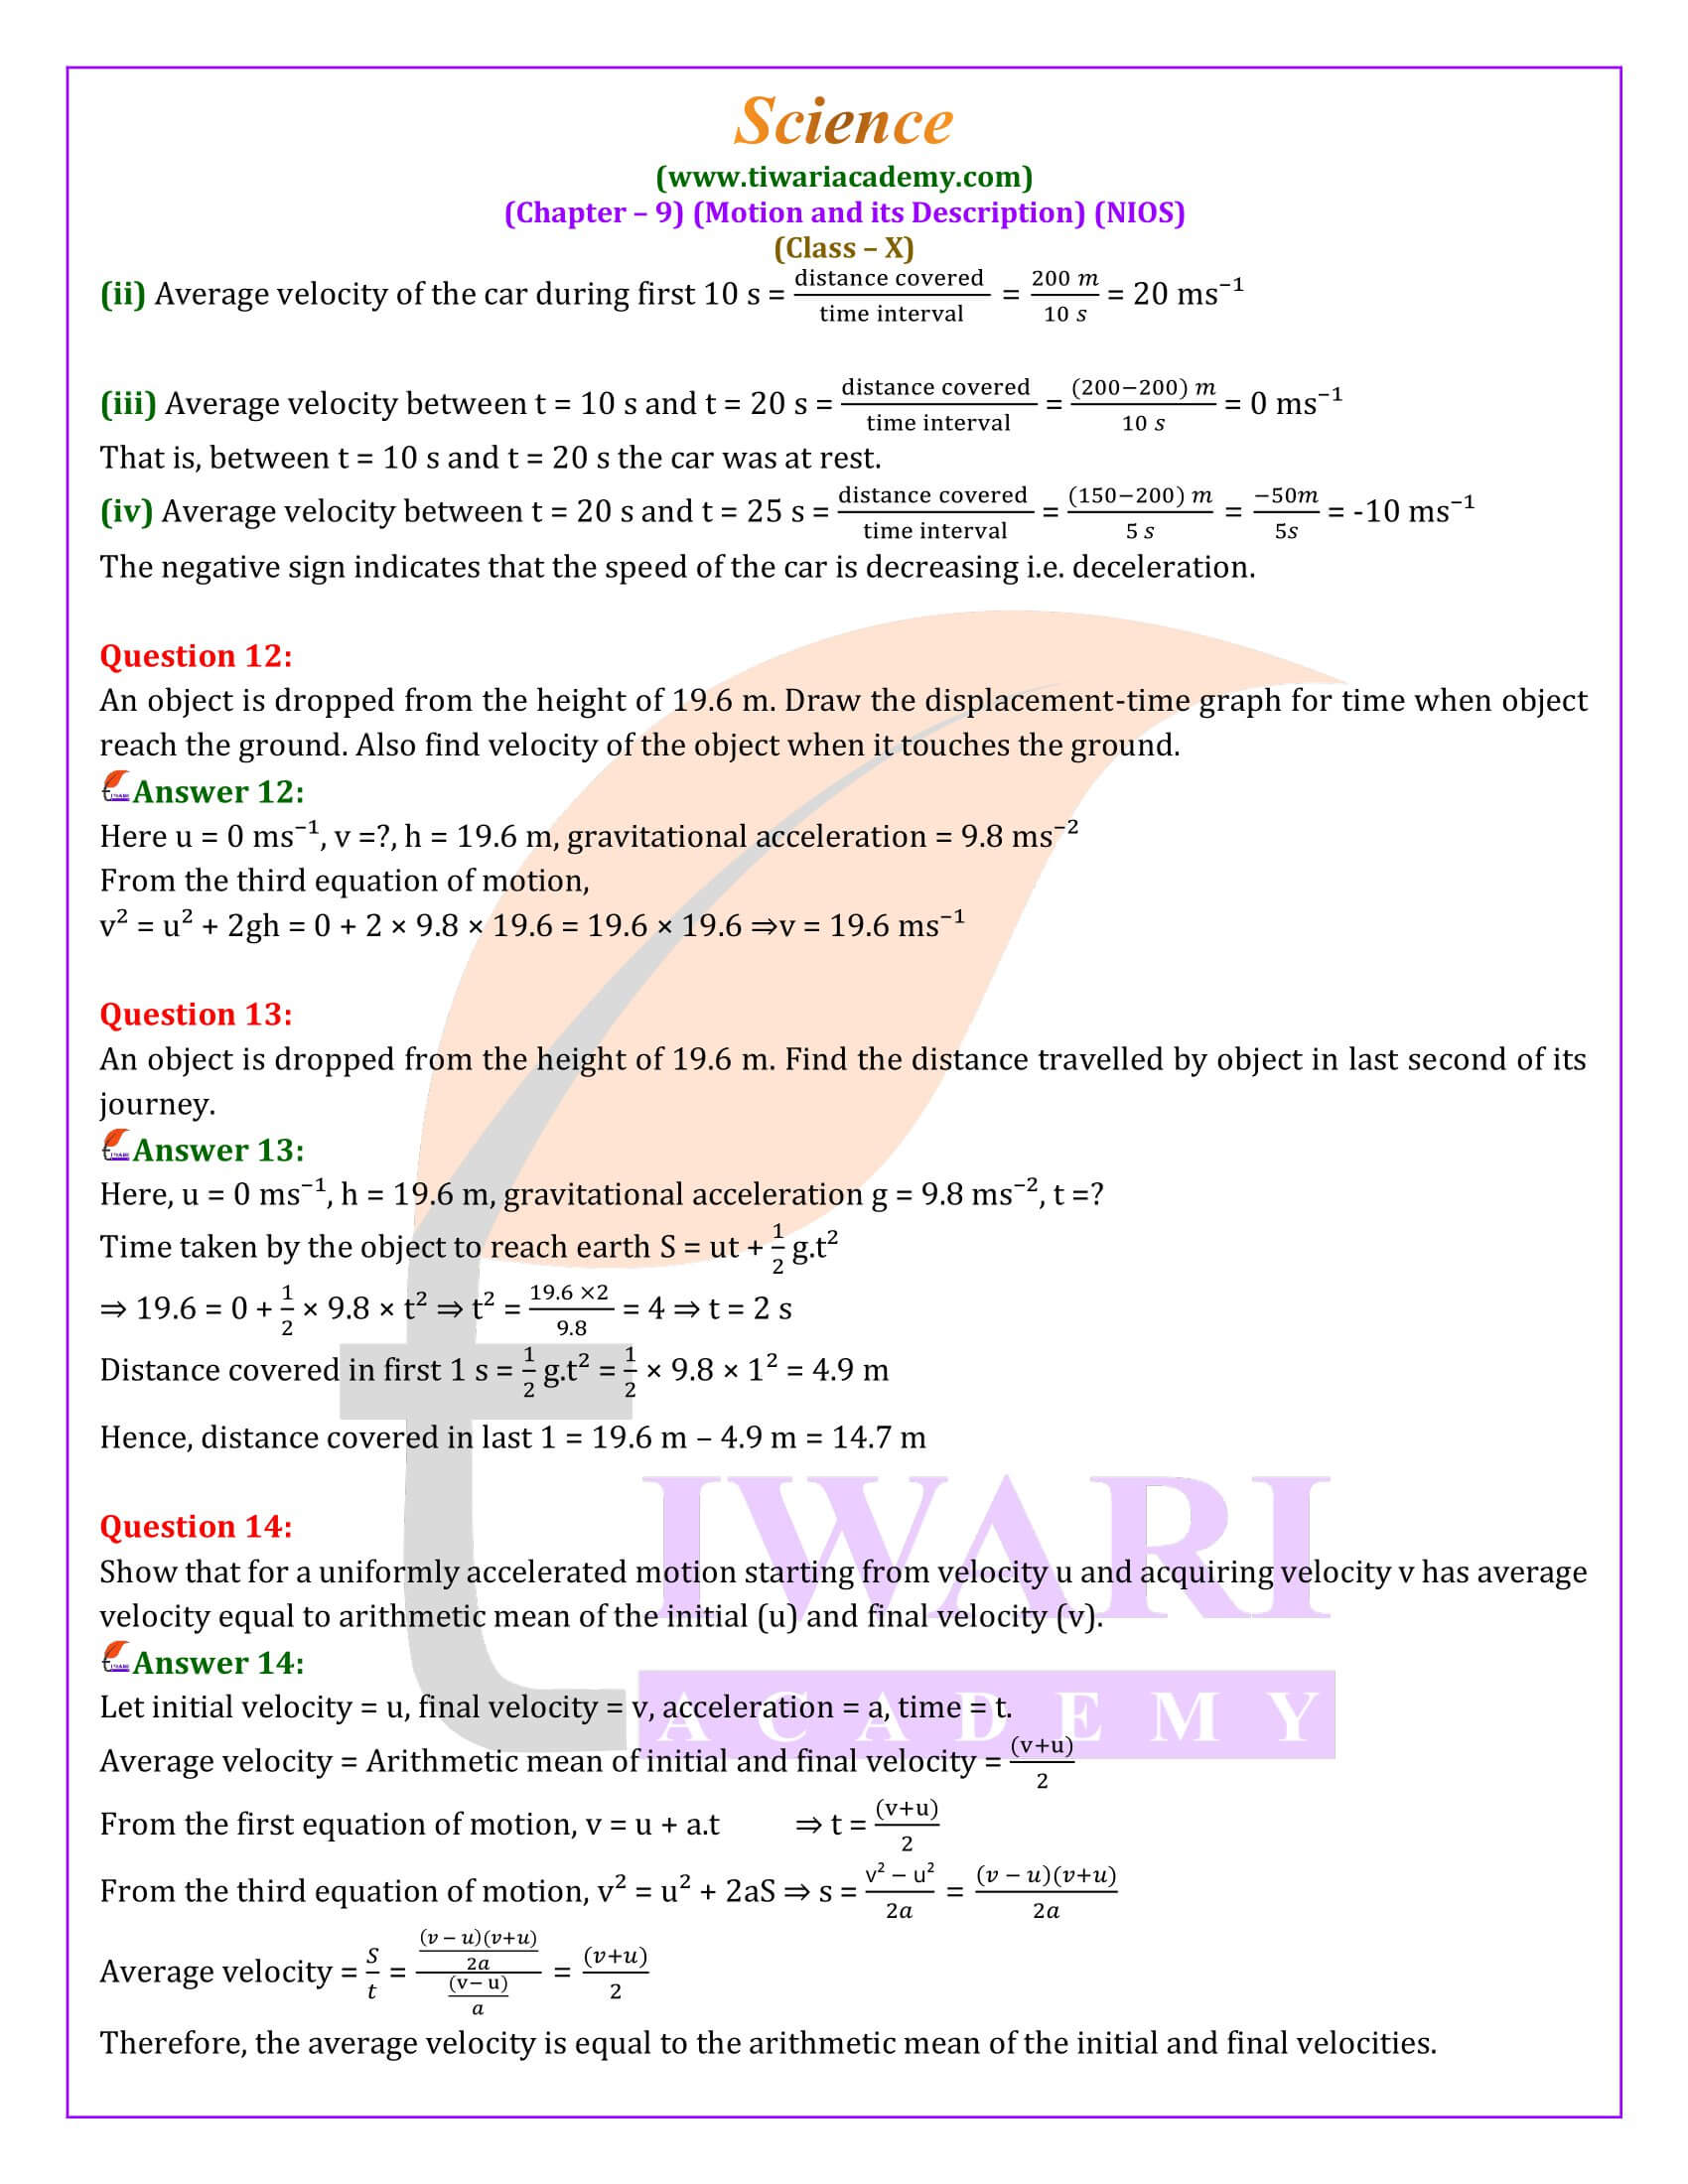 NIOS Science Chapter 9 Question Answers